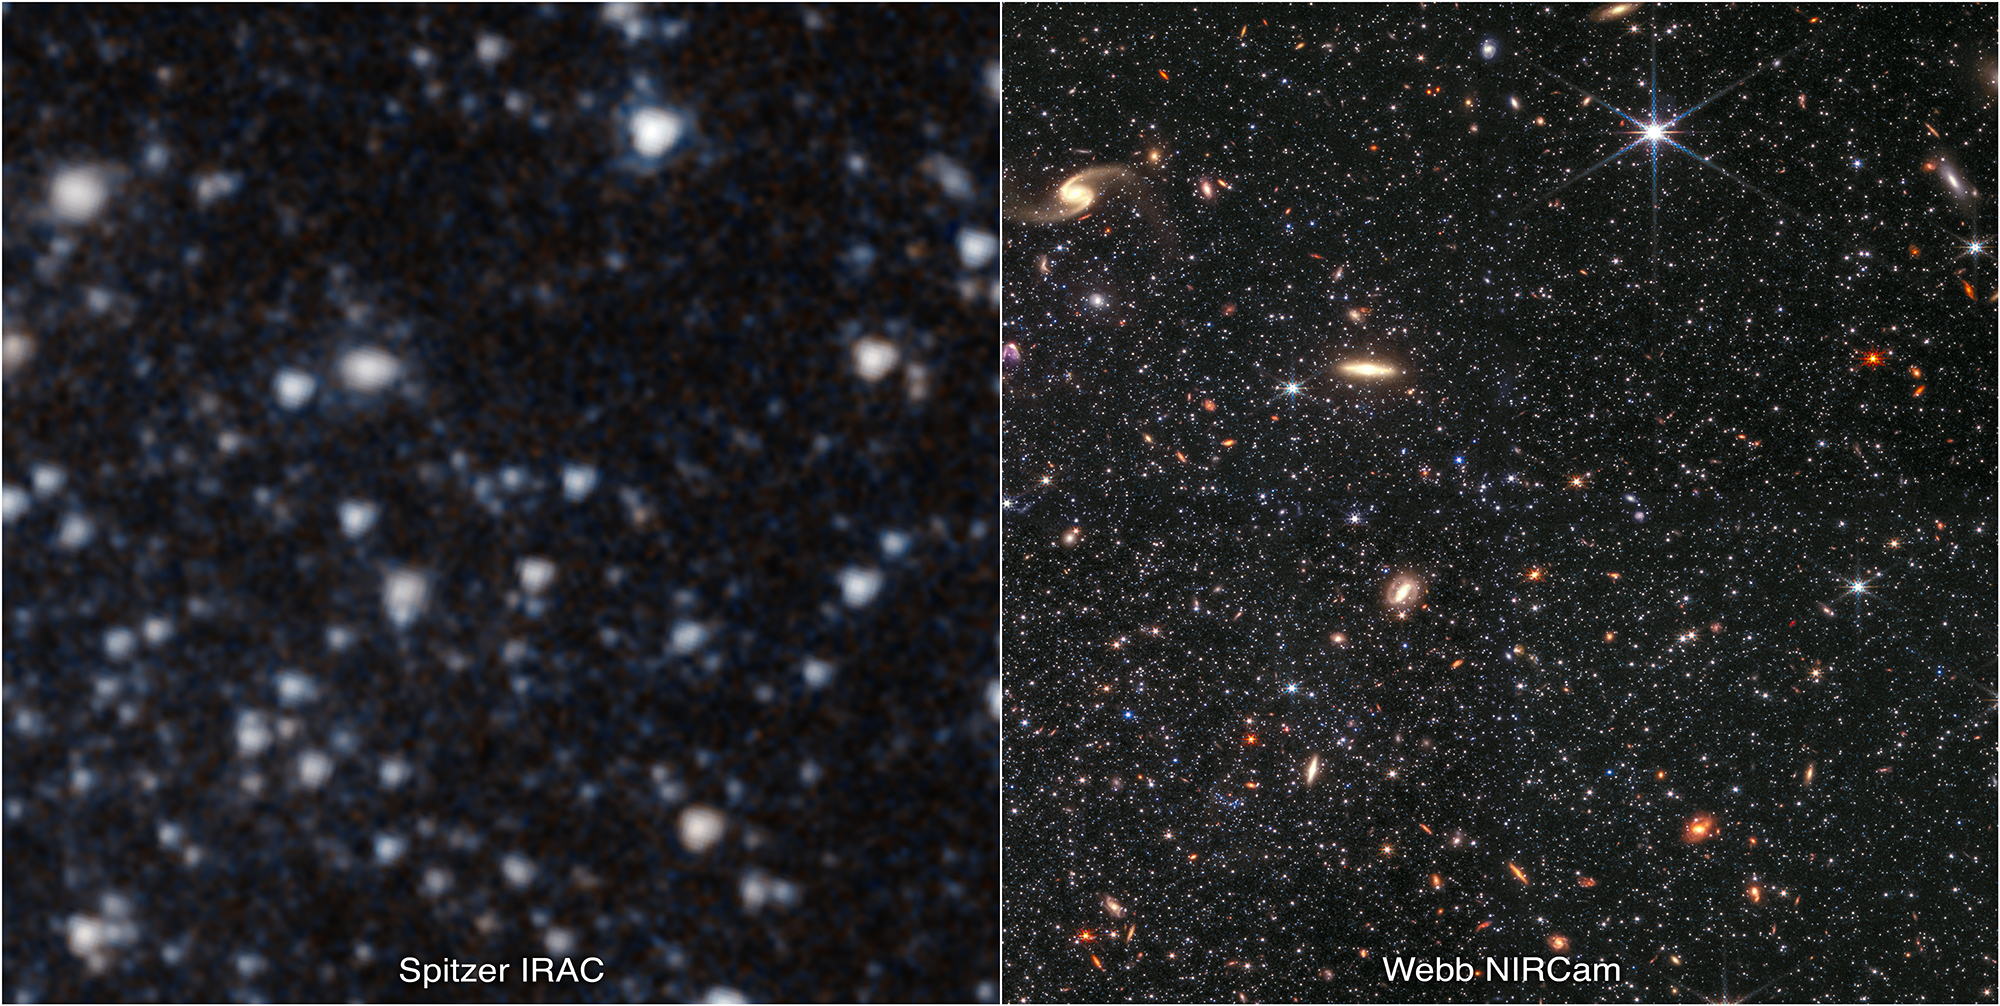 WLM dwarf galaxy comparison showing image by Spitzer (left) and Webb (right)